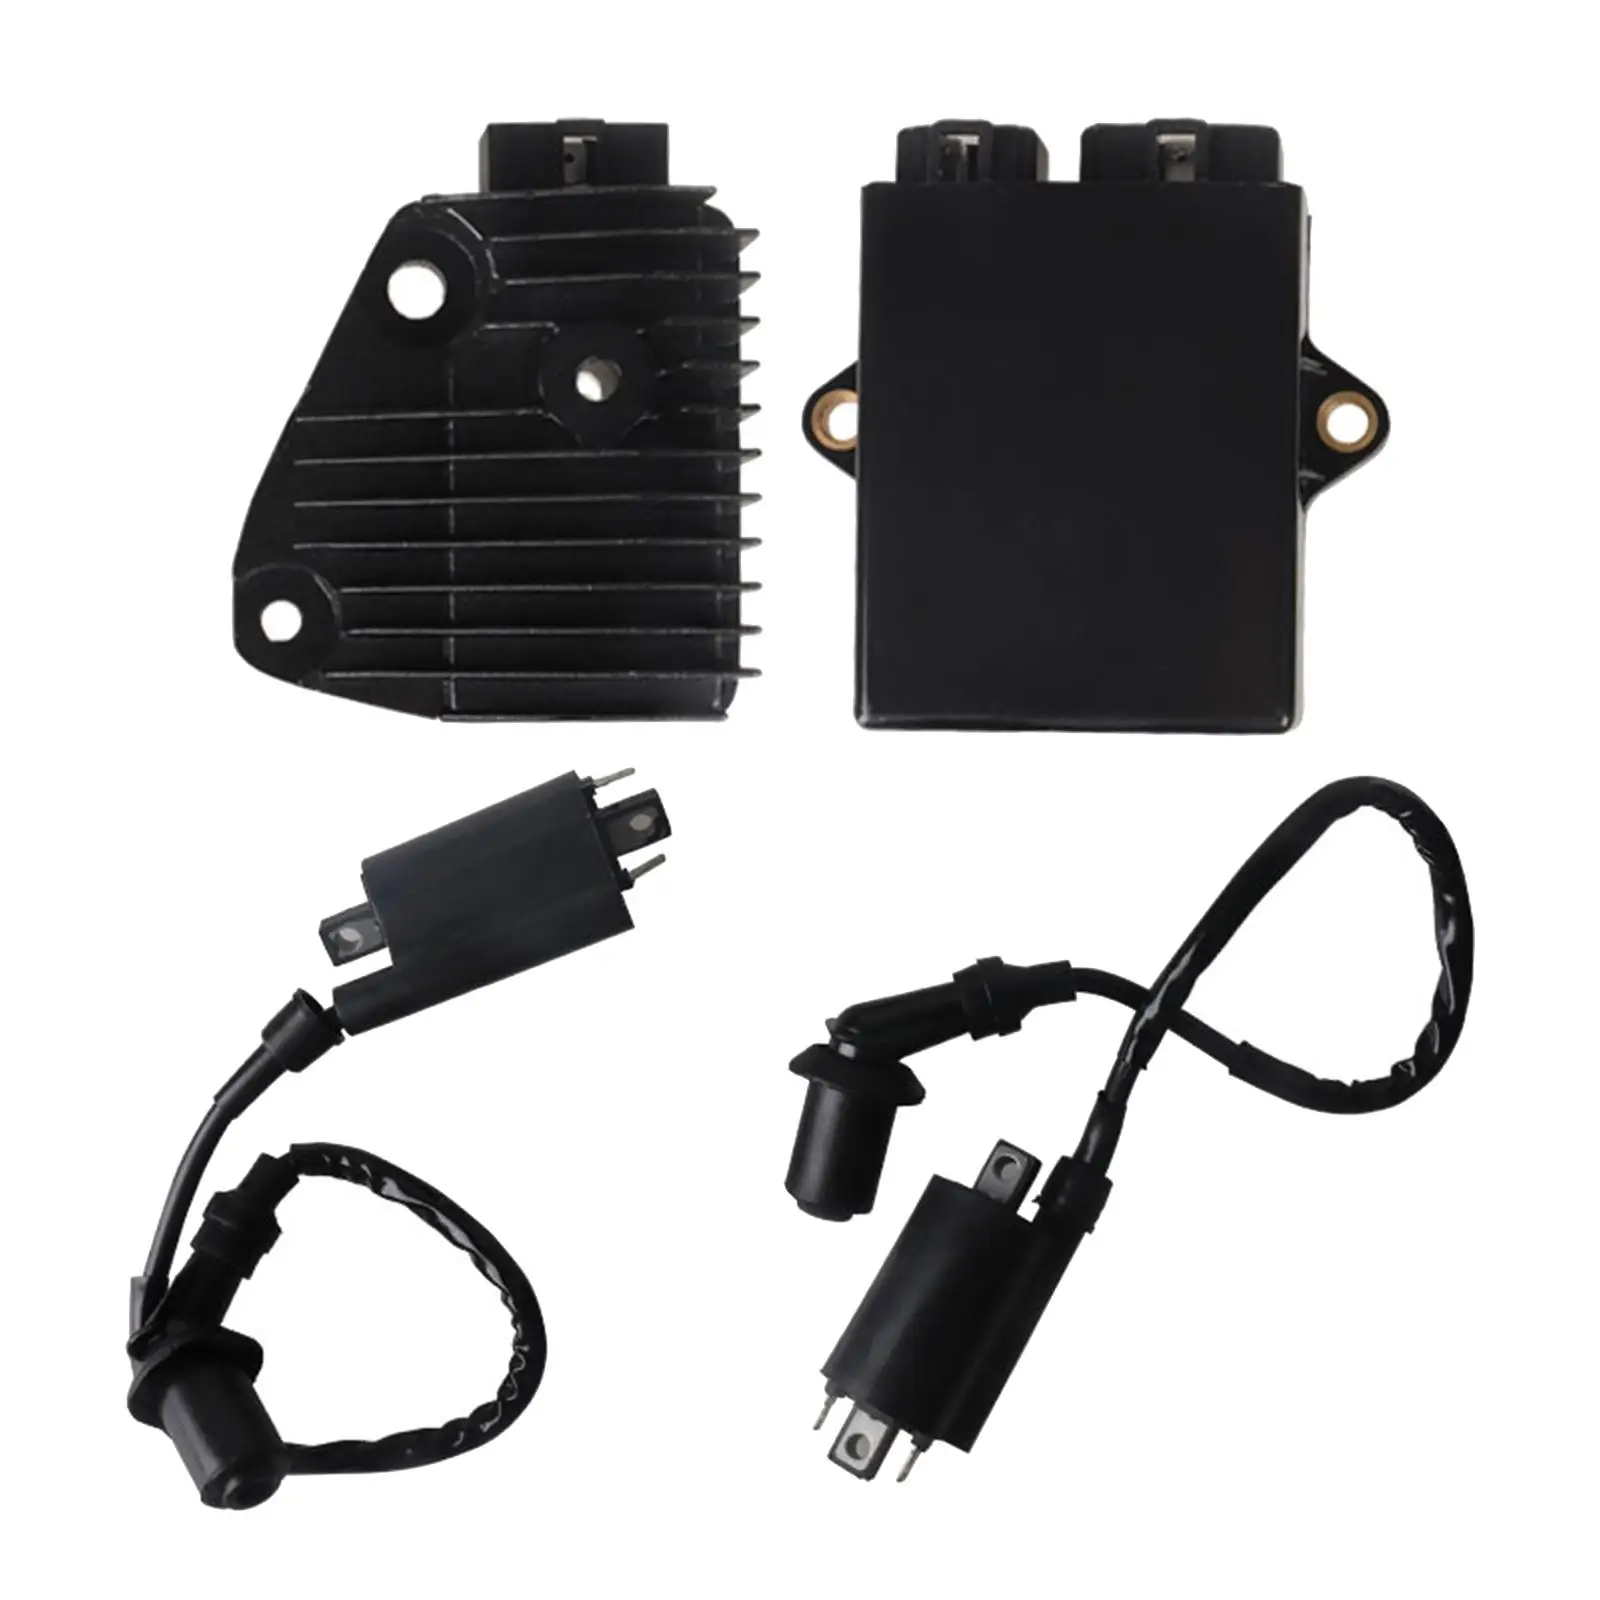 

Cdi Ignition Coil Regulator Premium High Performance Durable Replacement for Yamaha XV250 Route 66 XV250 Virago V-star 250